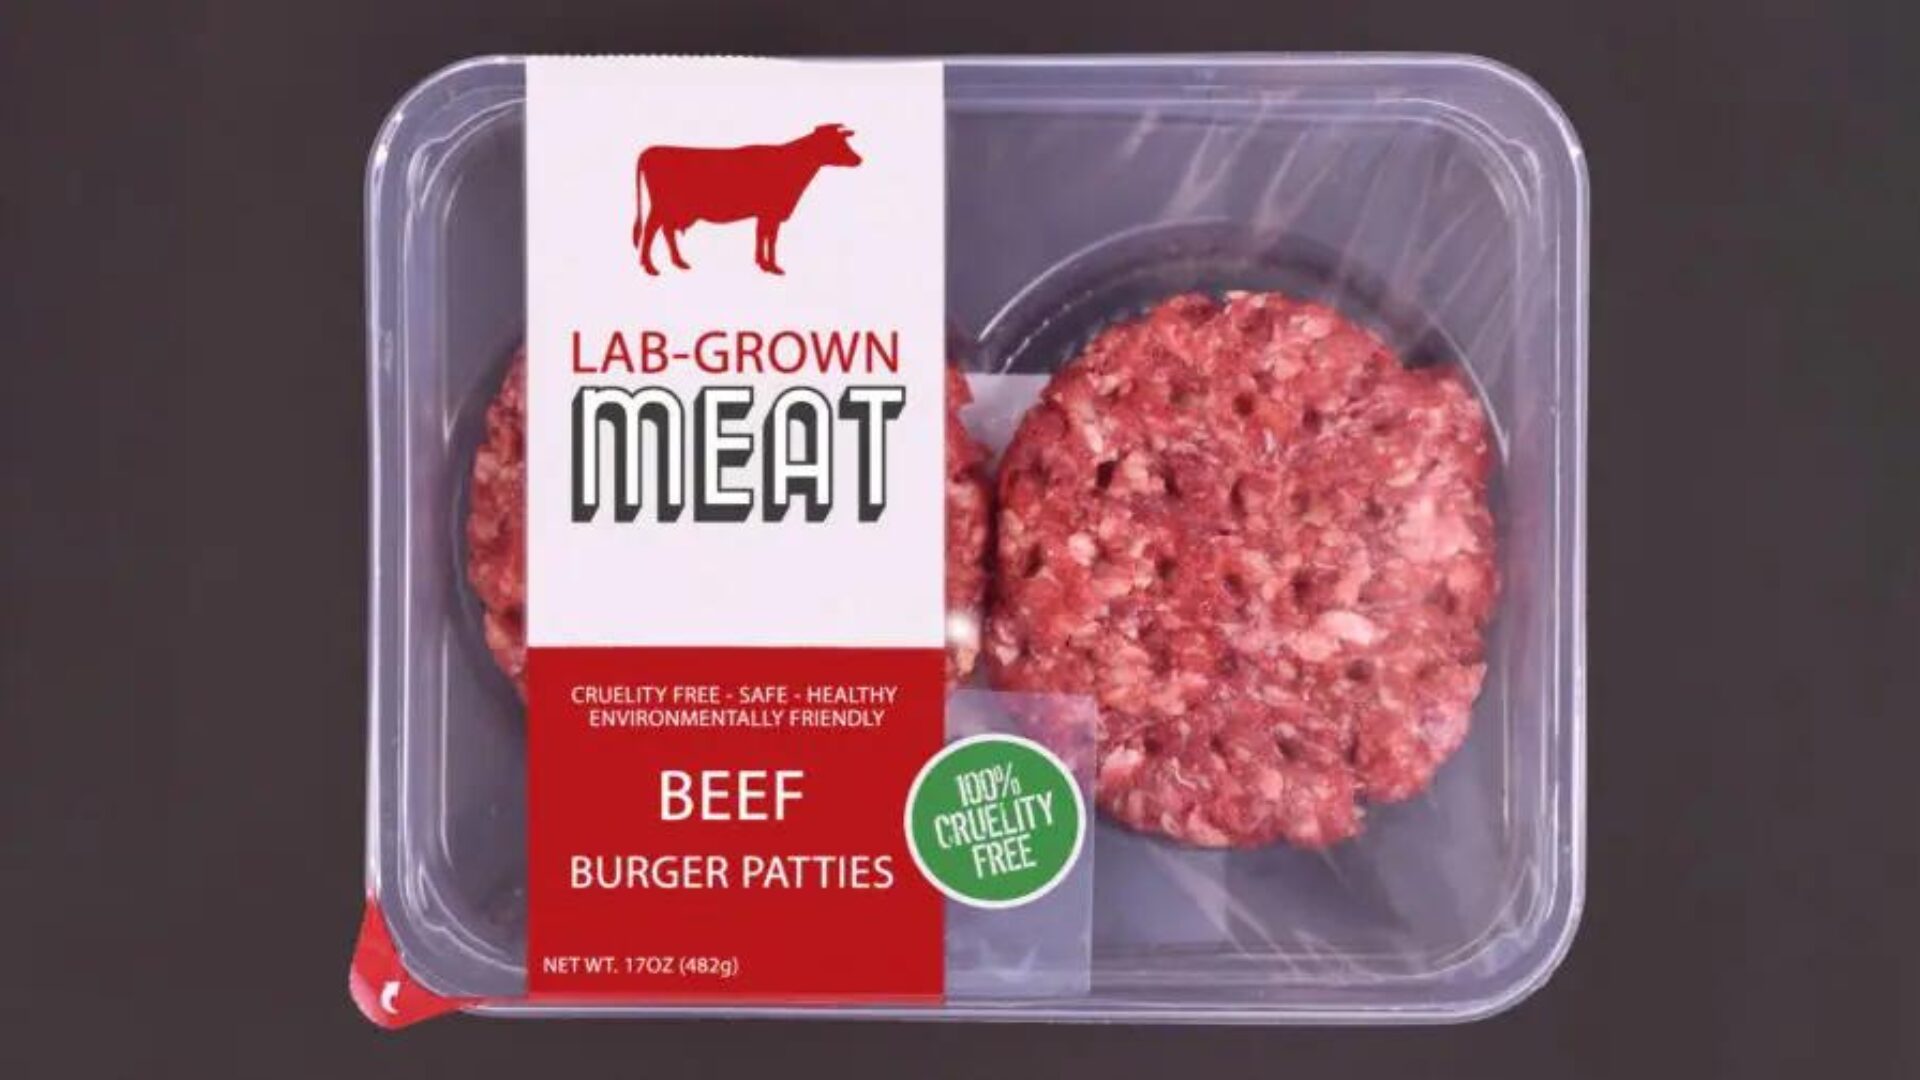 The State of Florida Has Joined Three Other States in Passing Restrictions on Lab-Grown Meat